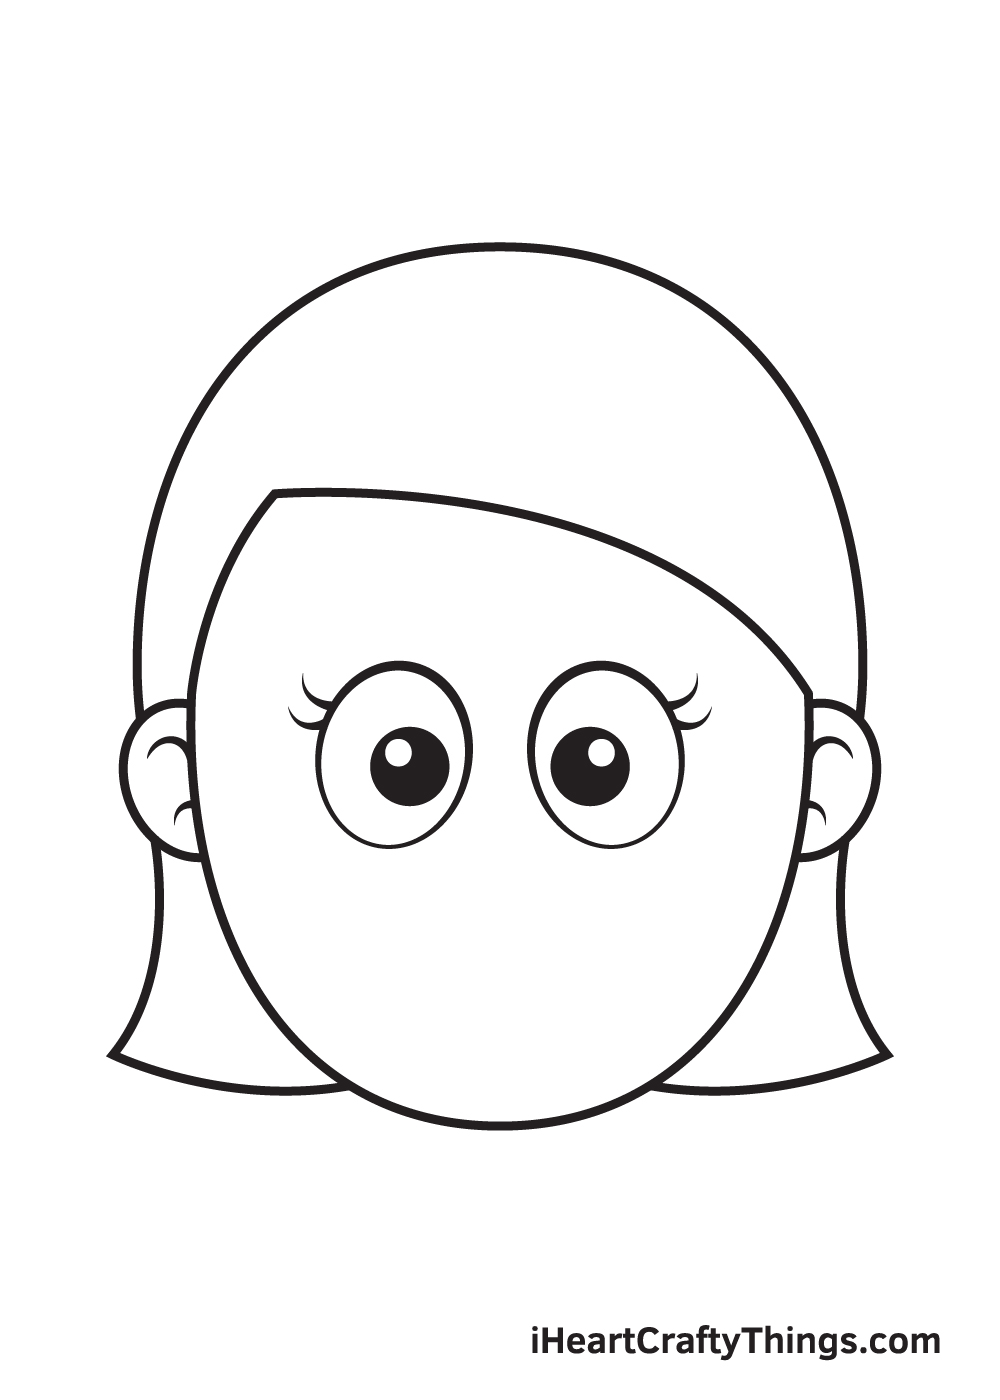 How to Draw an Easy Face, Coloring Page, Trace Drawing-saigonsouth.com.vn